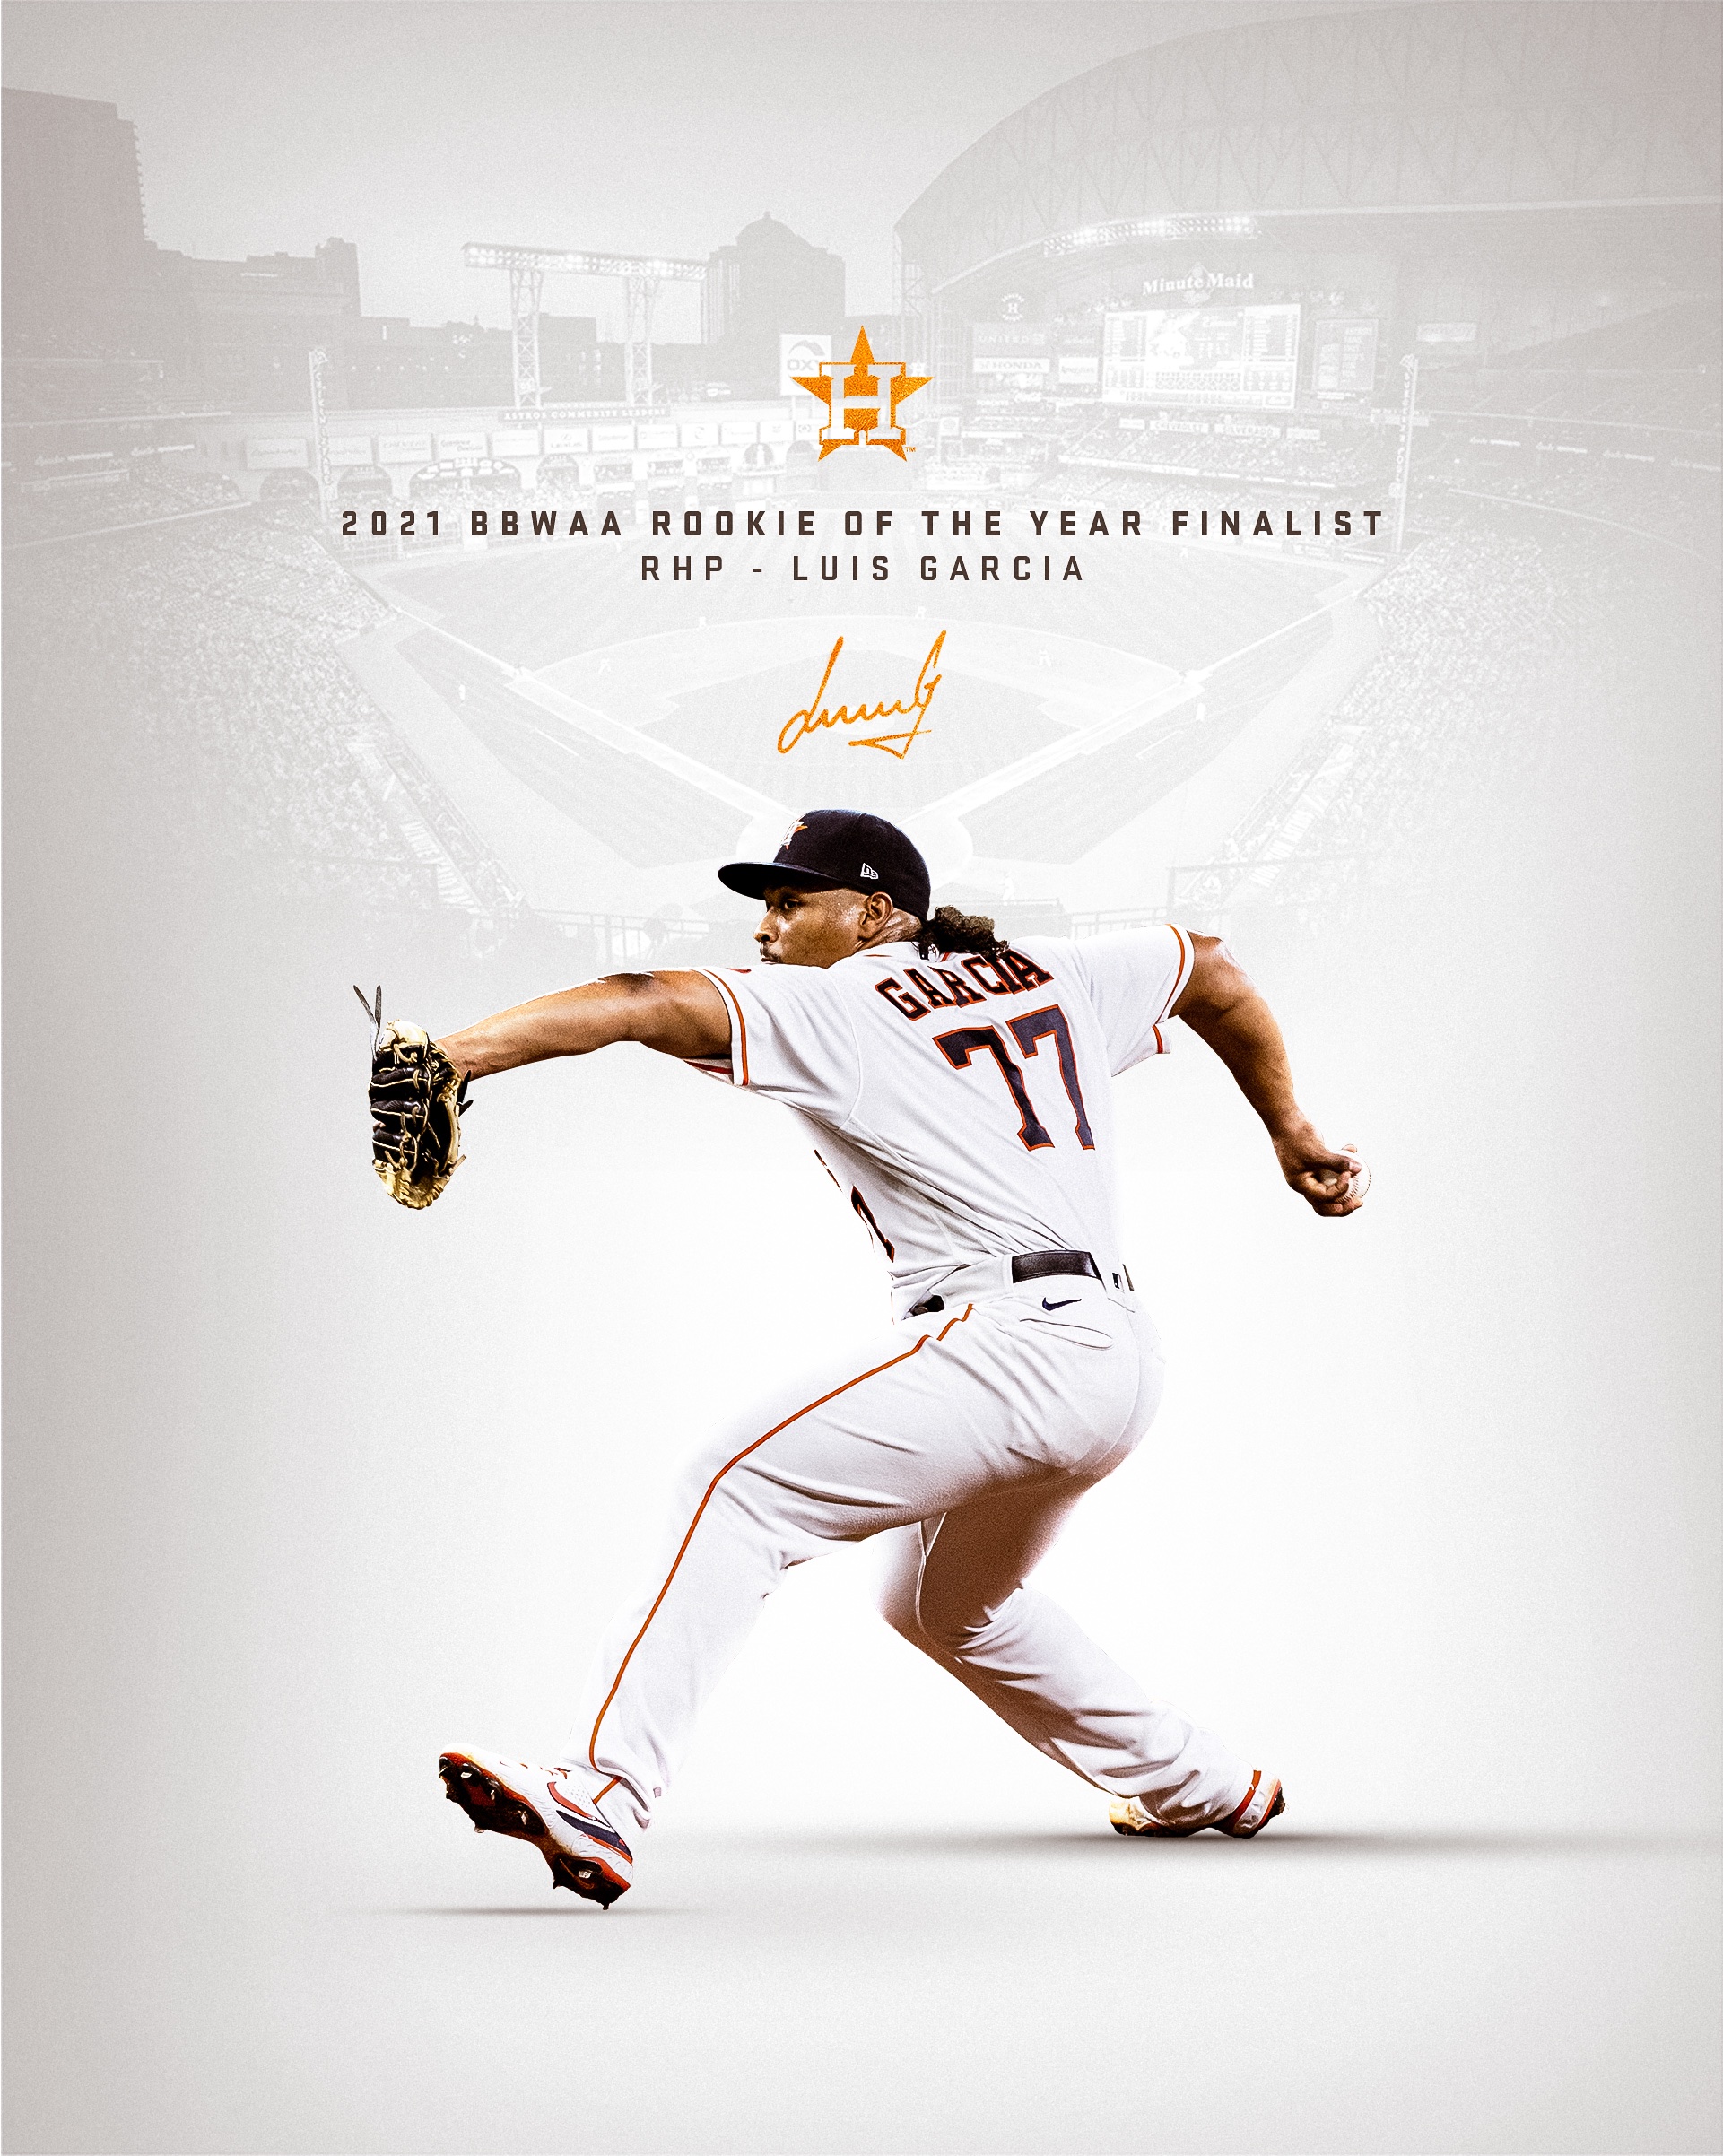 Houston Astros on X: Congratulations to Luis Garcia for being